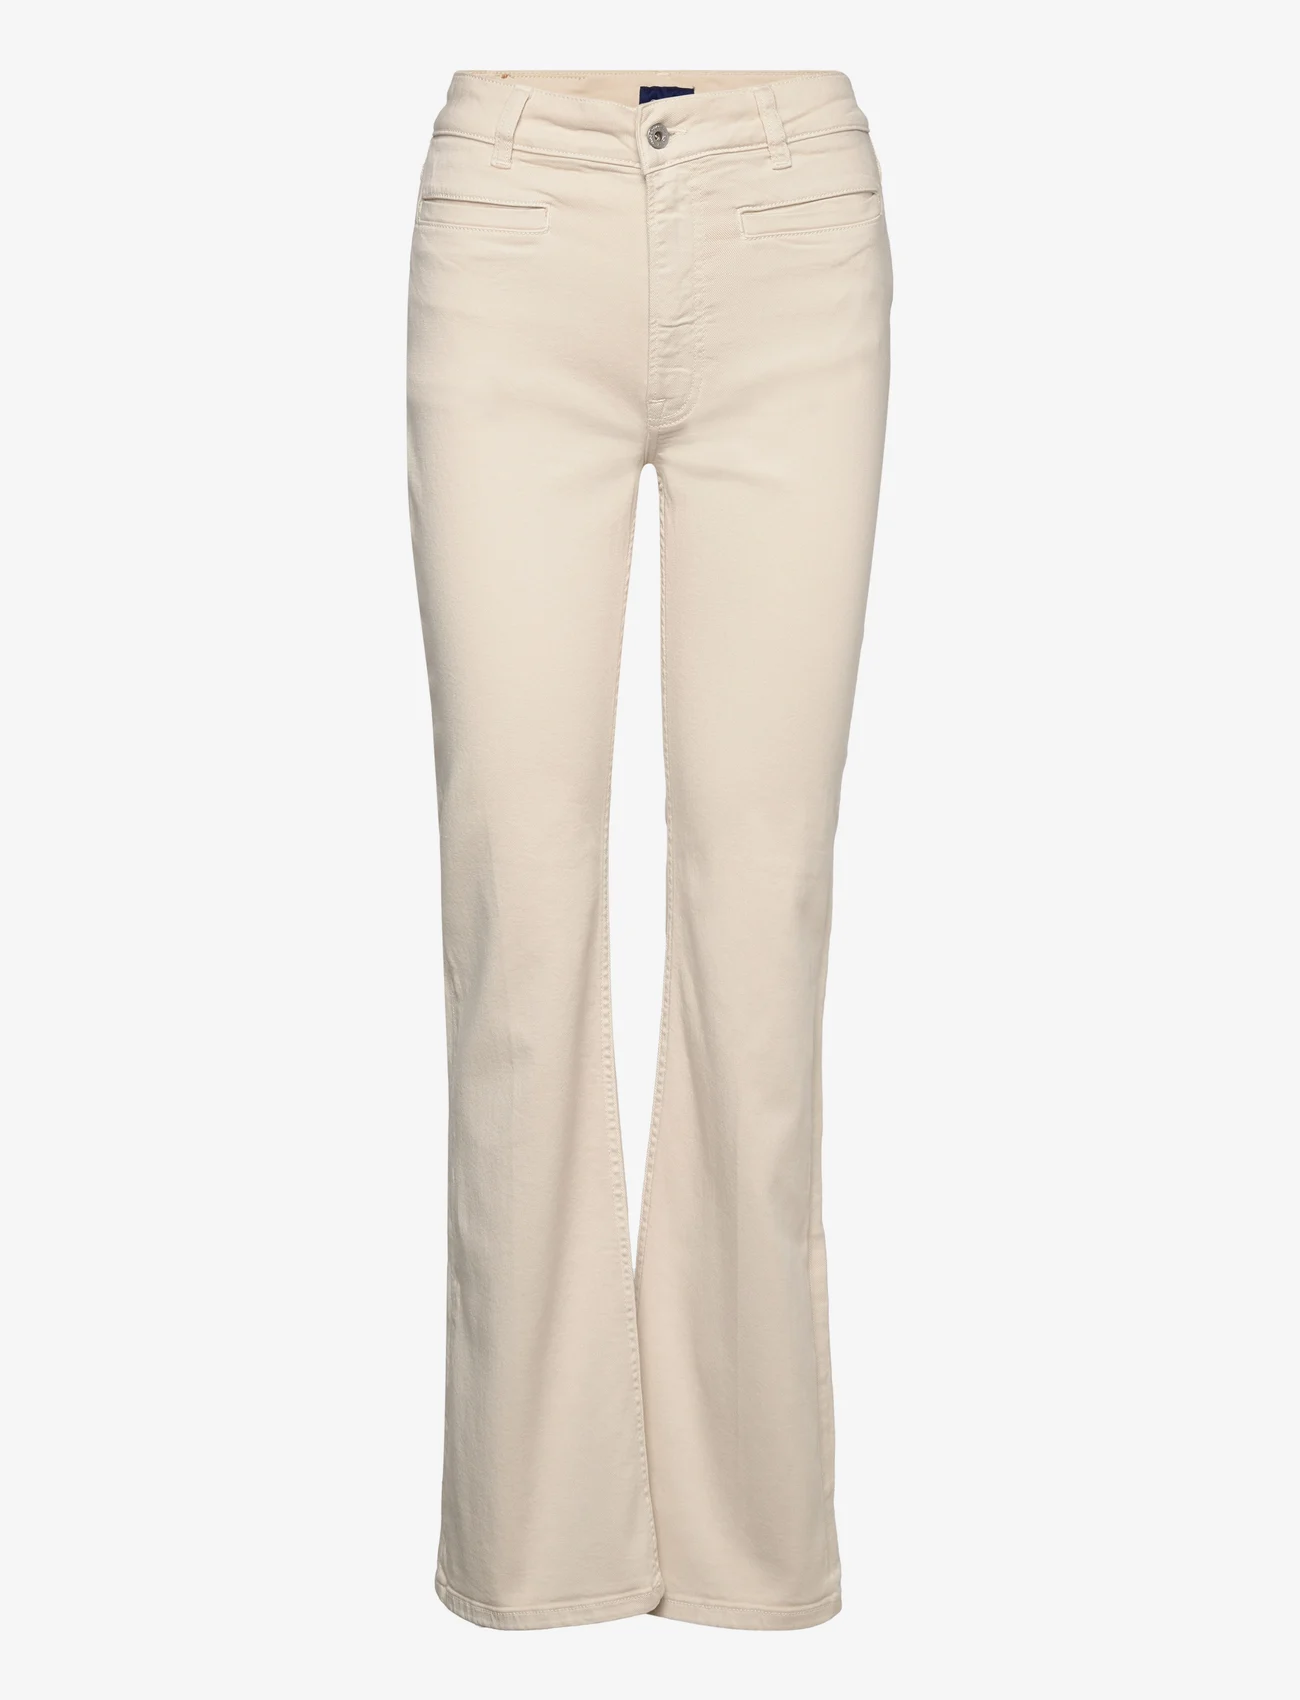 GANT - D1. FLARE COLOR JEANS - putty - 0